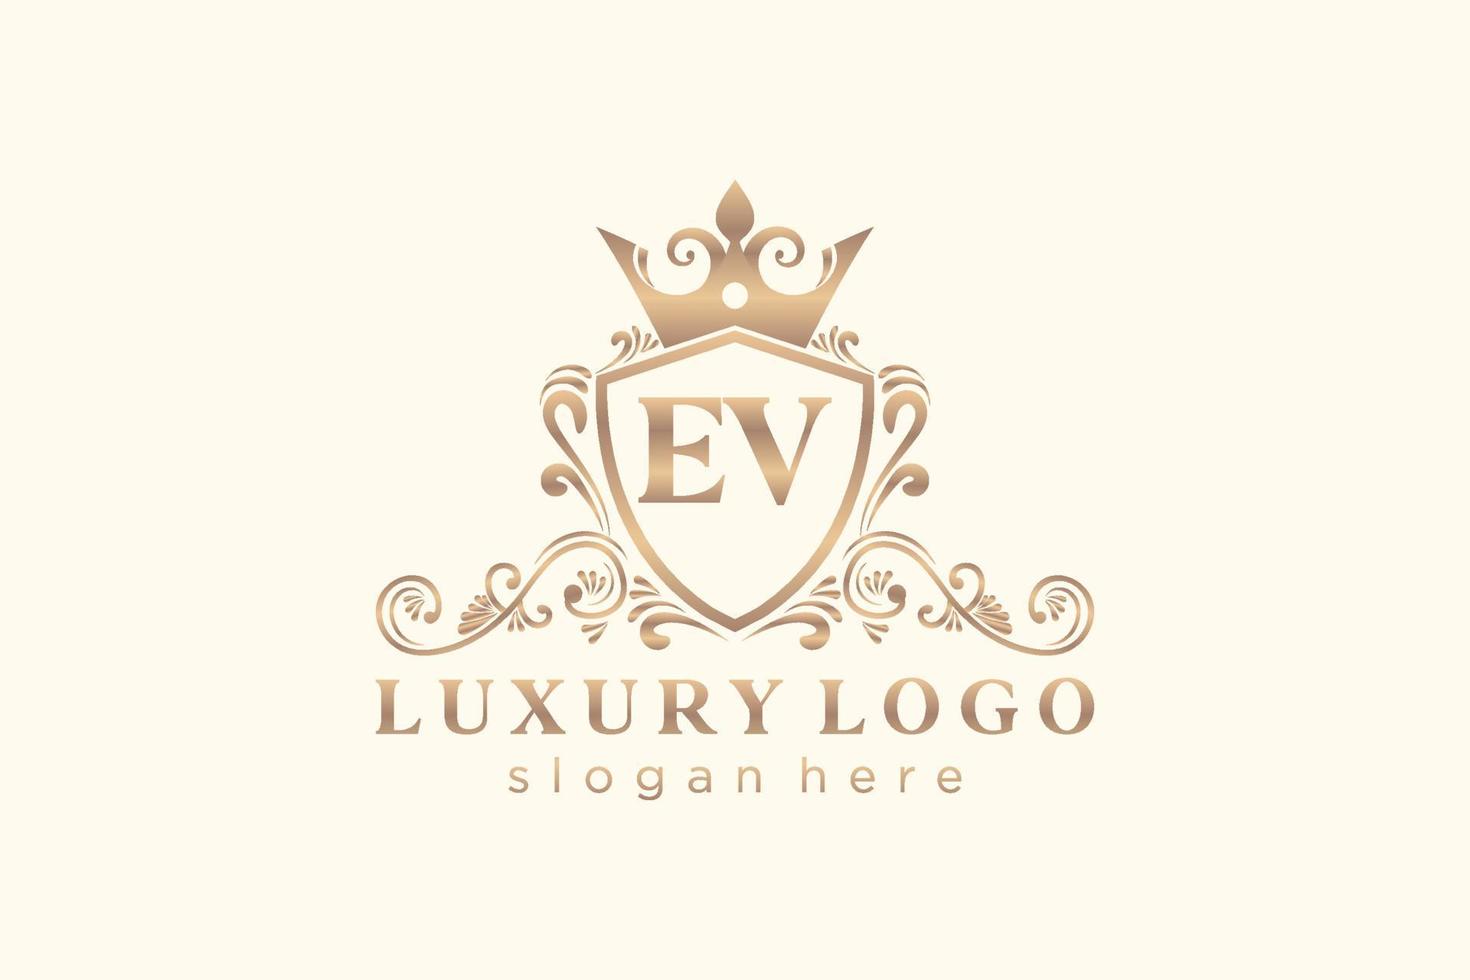 Initial EV Letter Royal Luxury Logo template in vector art for Restaurant, Royalty, Boutique, Cafe, Hotel, Heraldic, Jewelry, Fashion and other vector illustration.